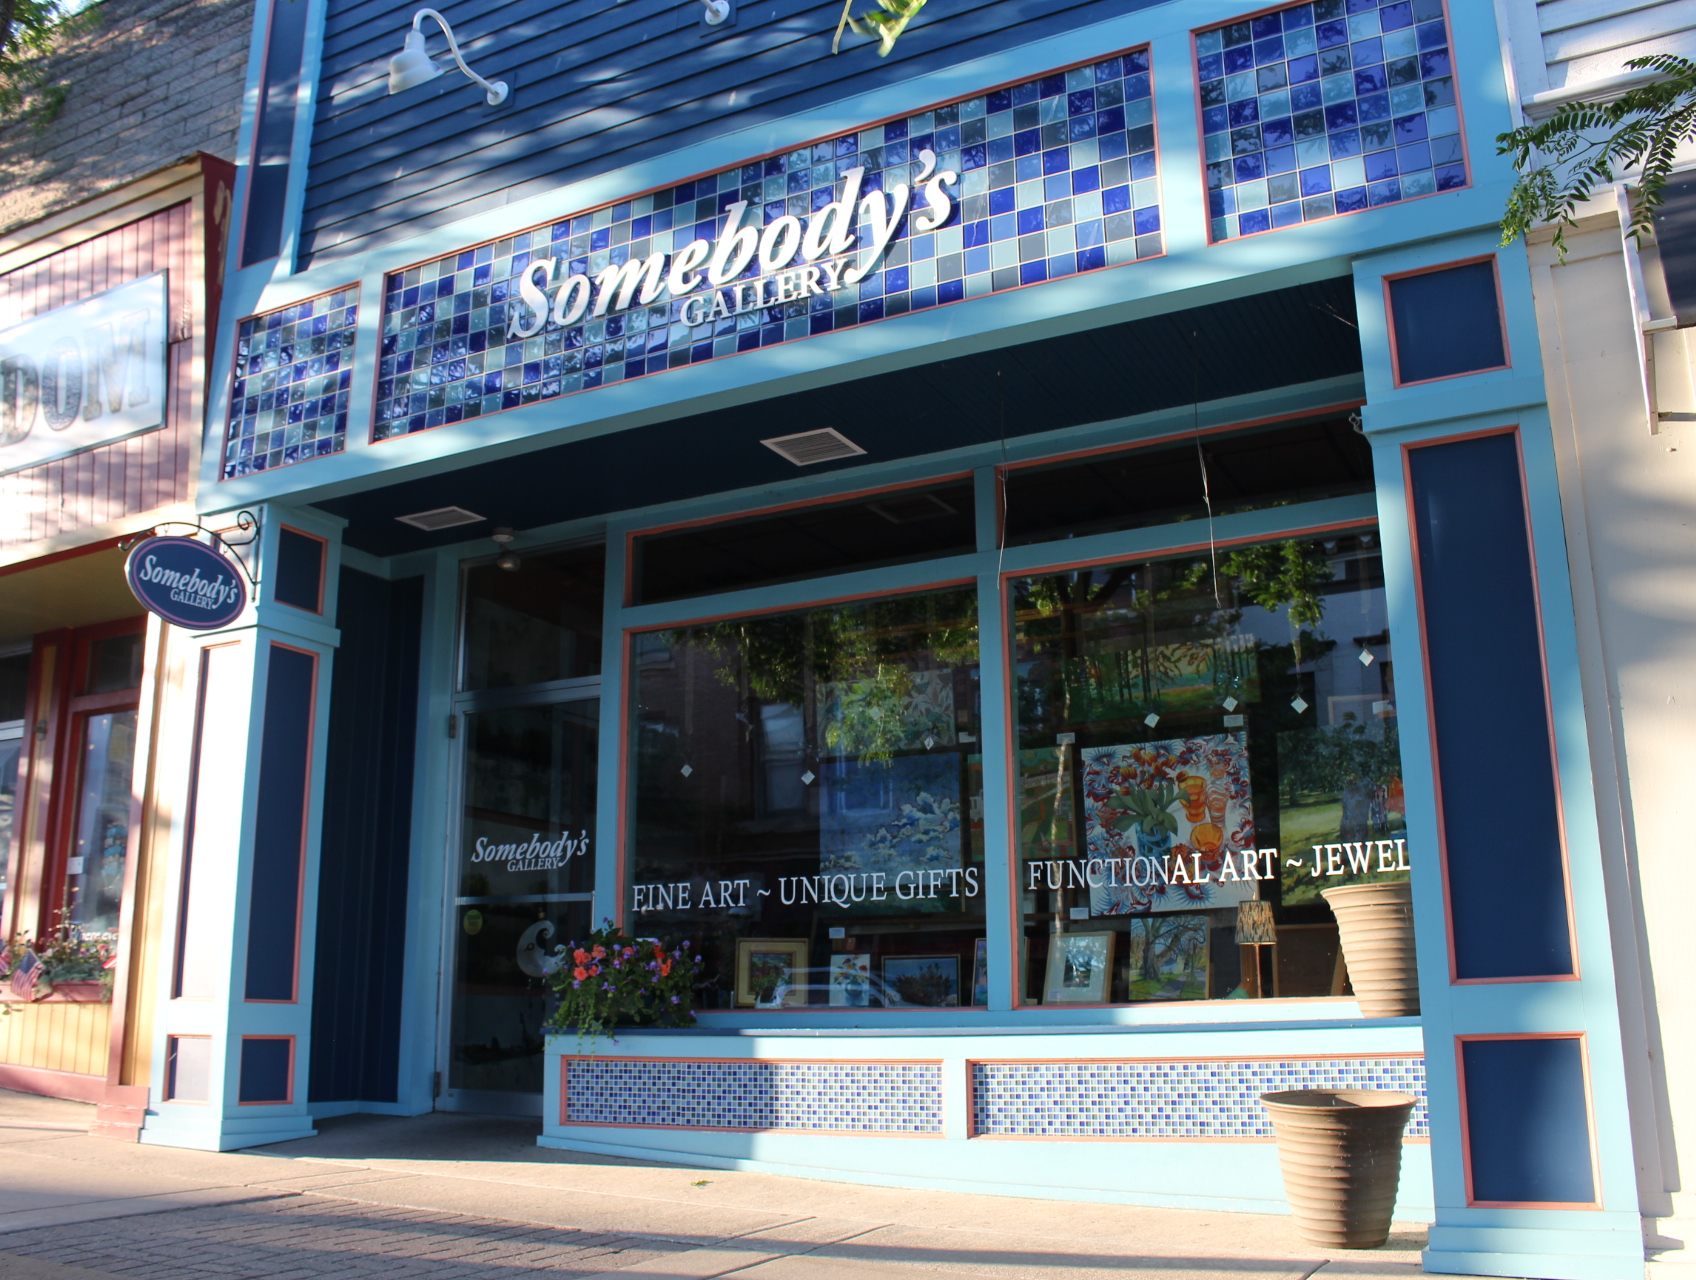 Things to do in Petoskey, MI